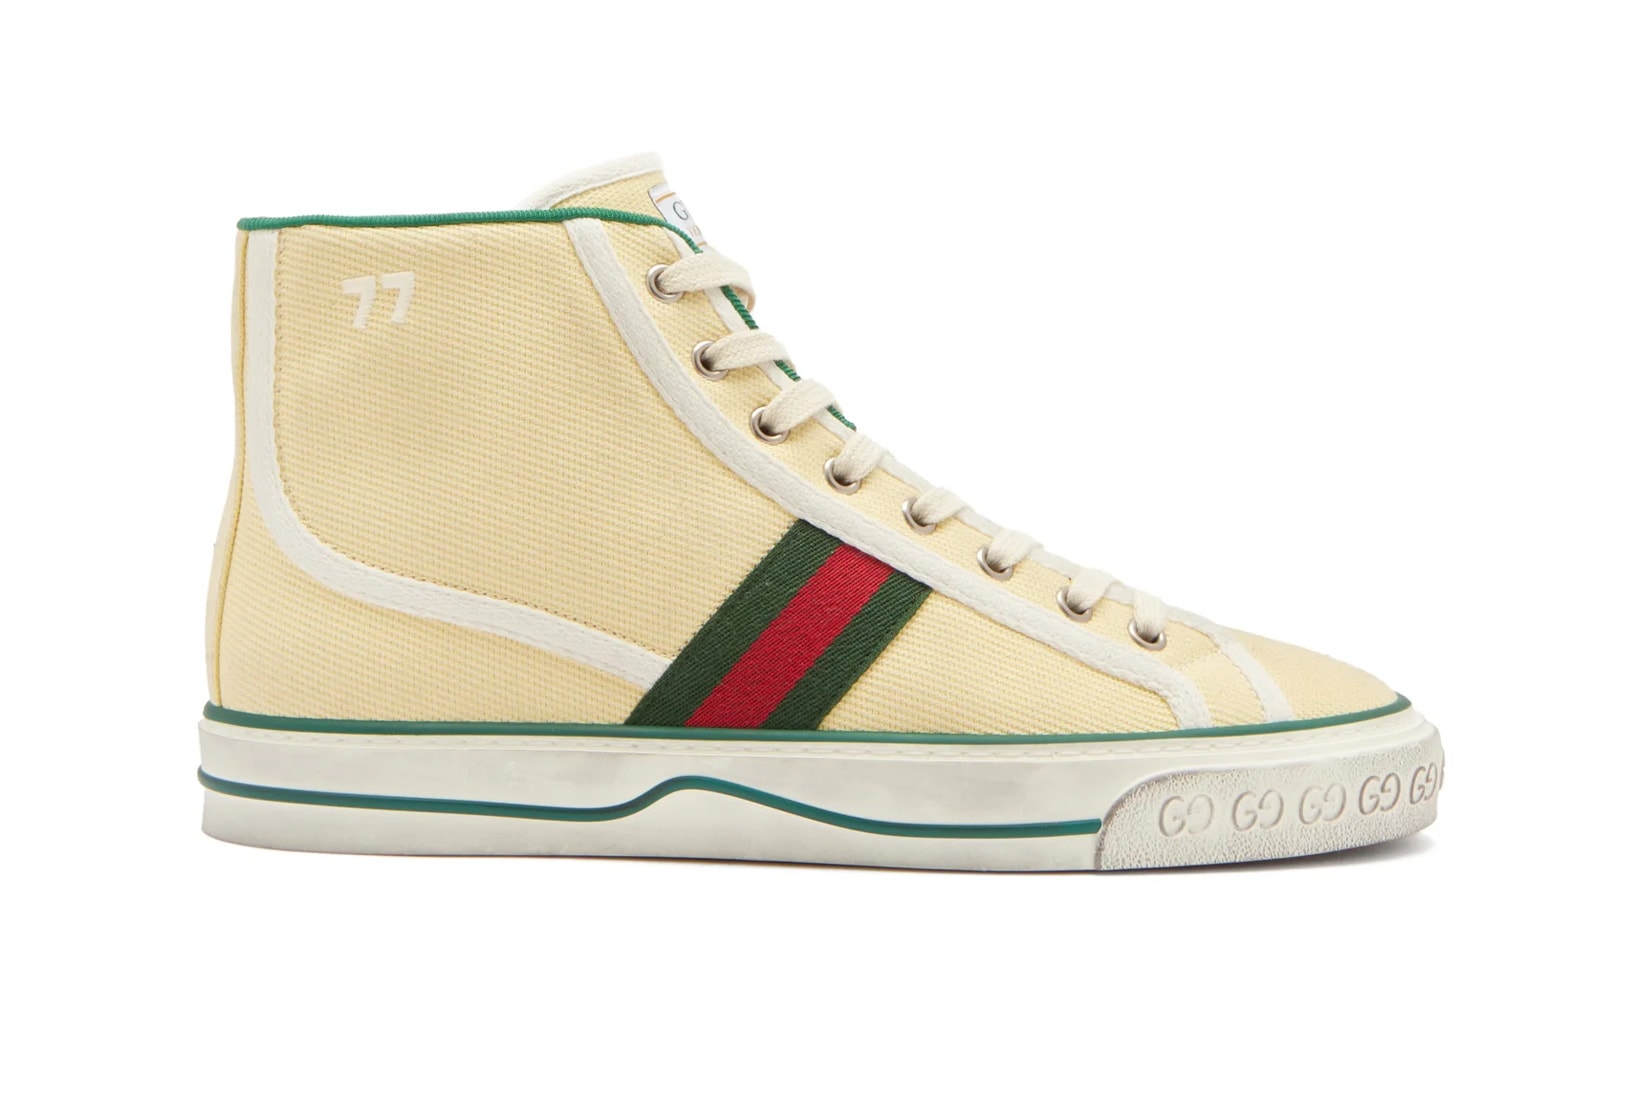 gucci tennis 1977 high-top sneakers canvas ivory green red stripes price info